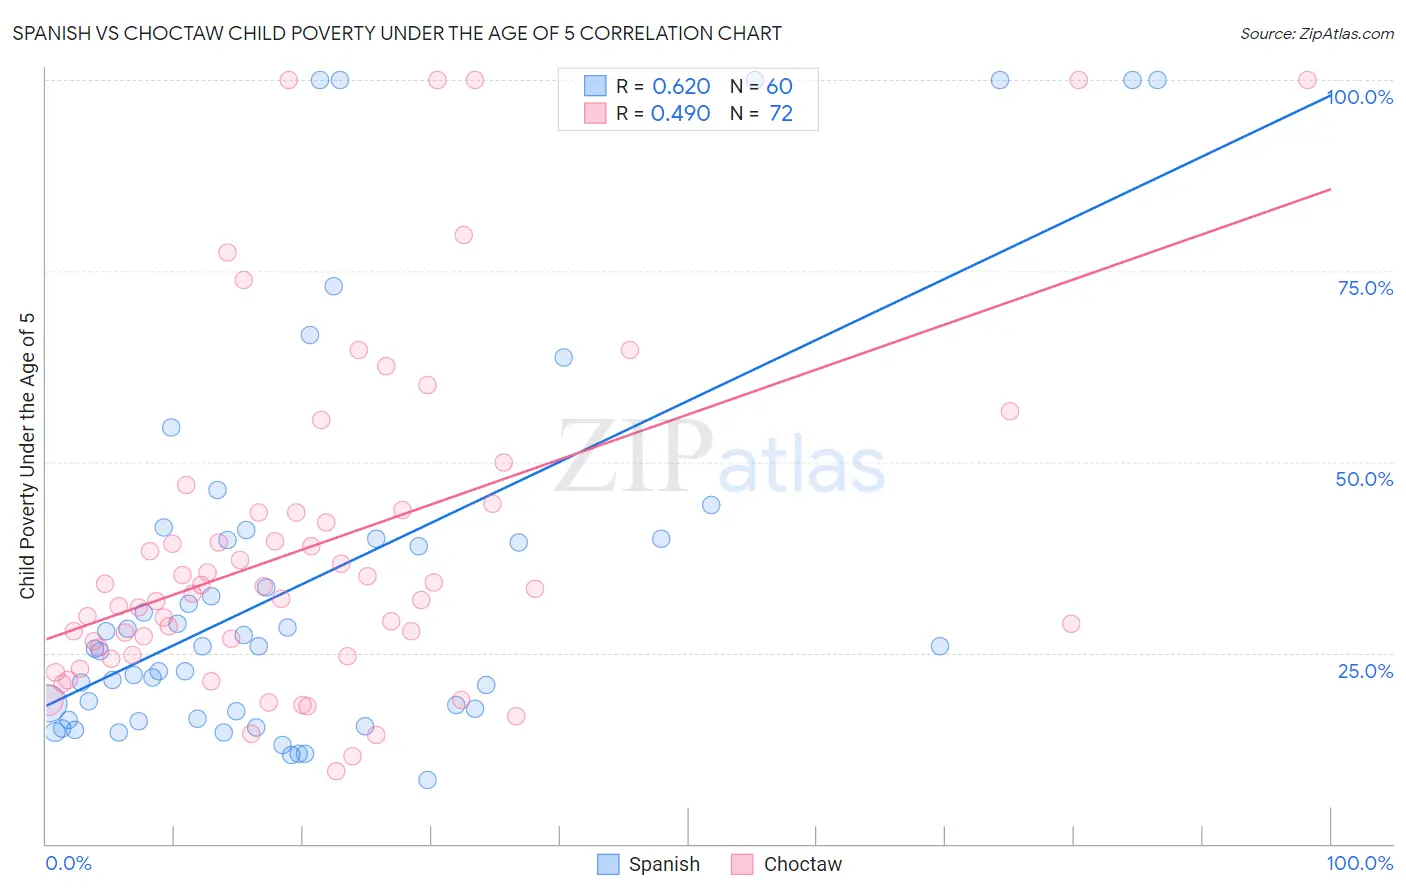 Spanish vs Choctaw Child Poverty Under the Age of 5